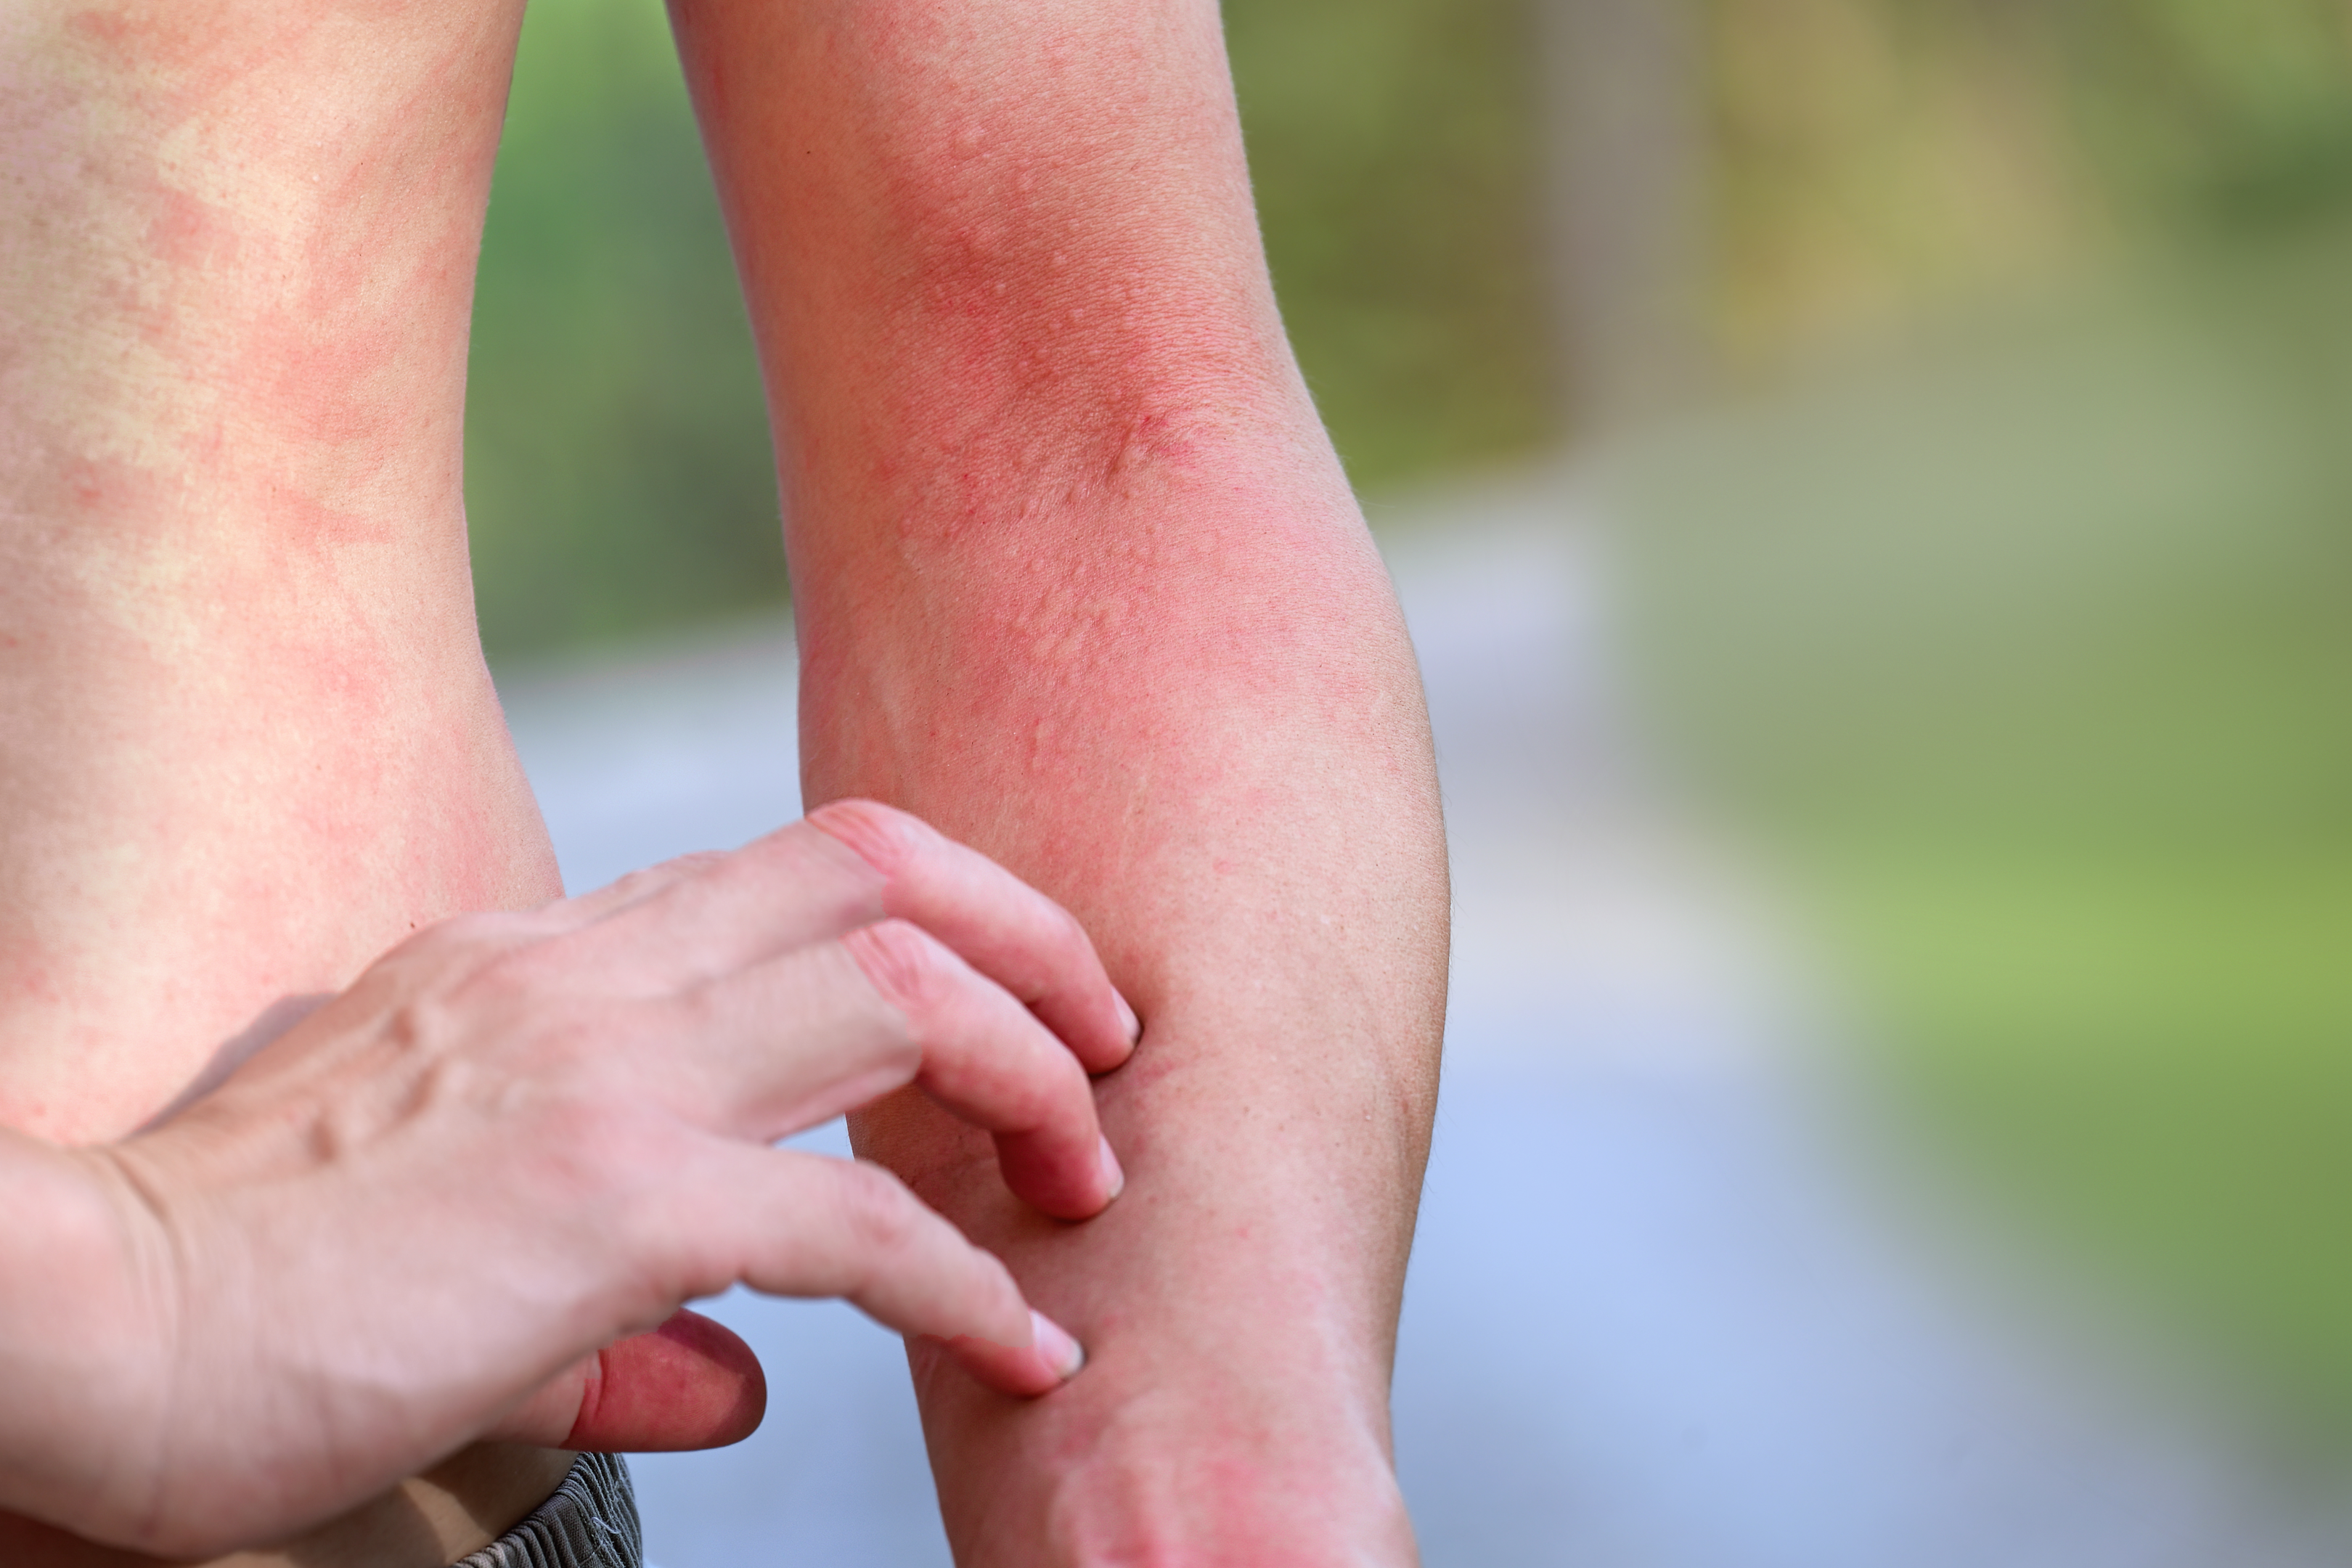 symptoms of heat rash and what to do when a heat rash occurs